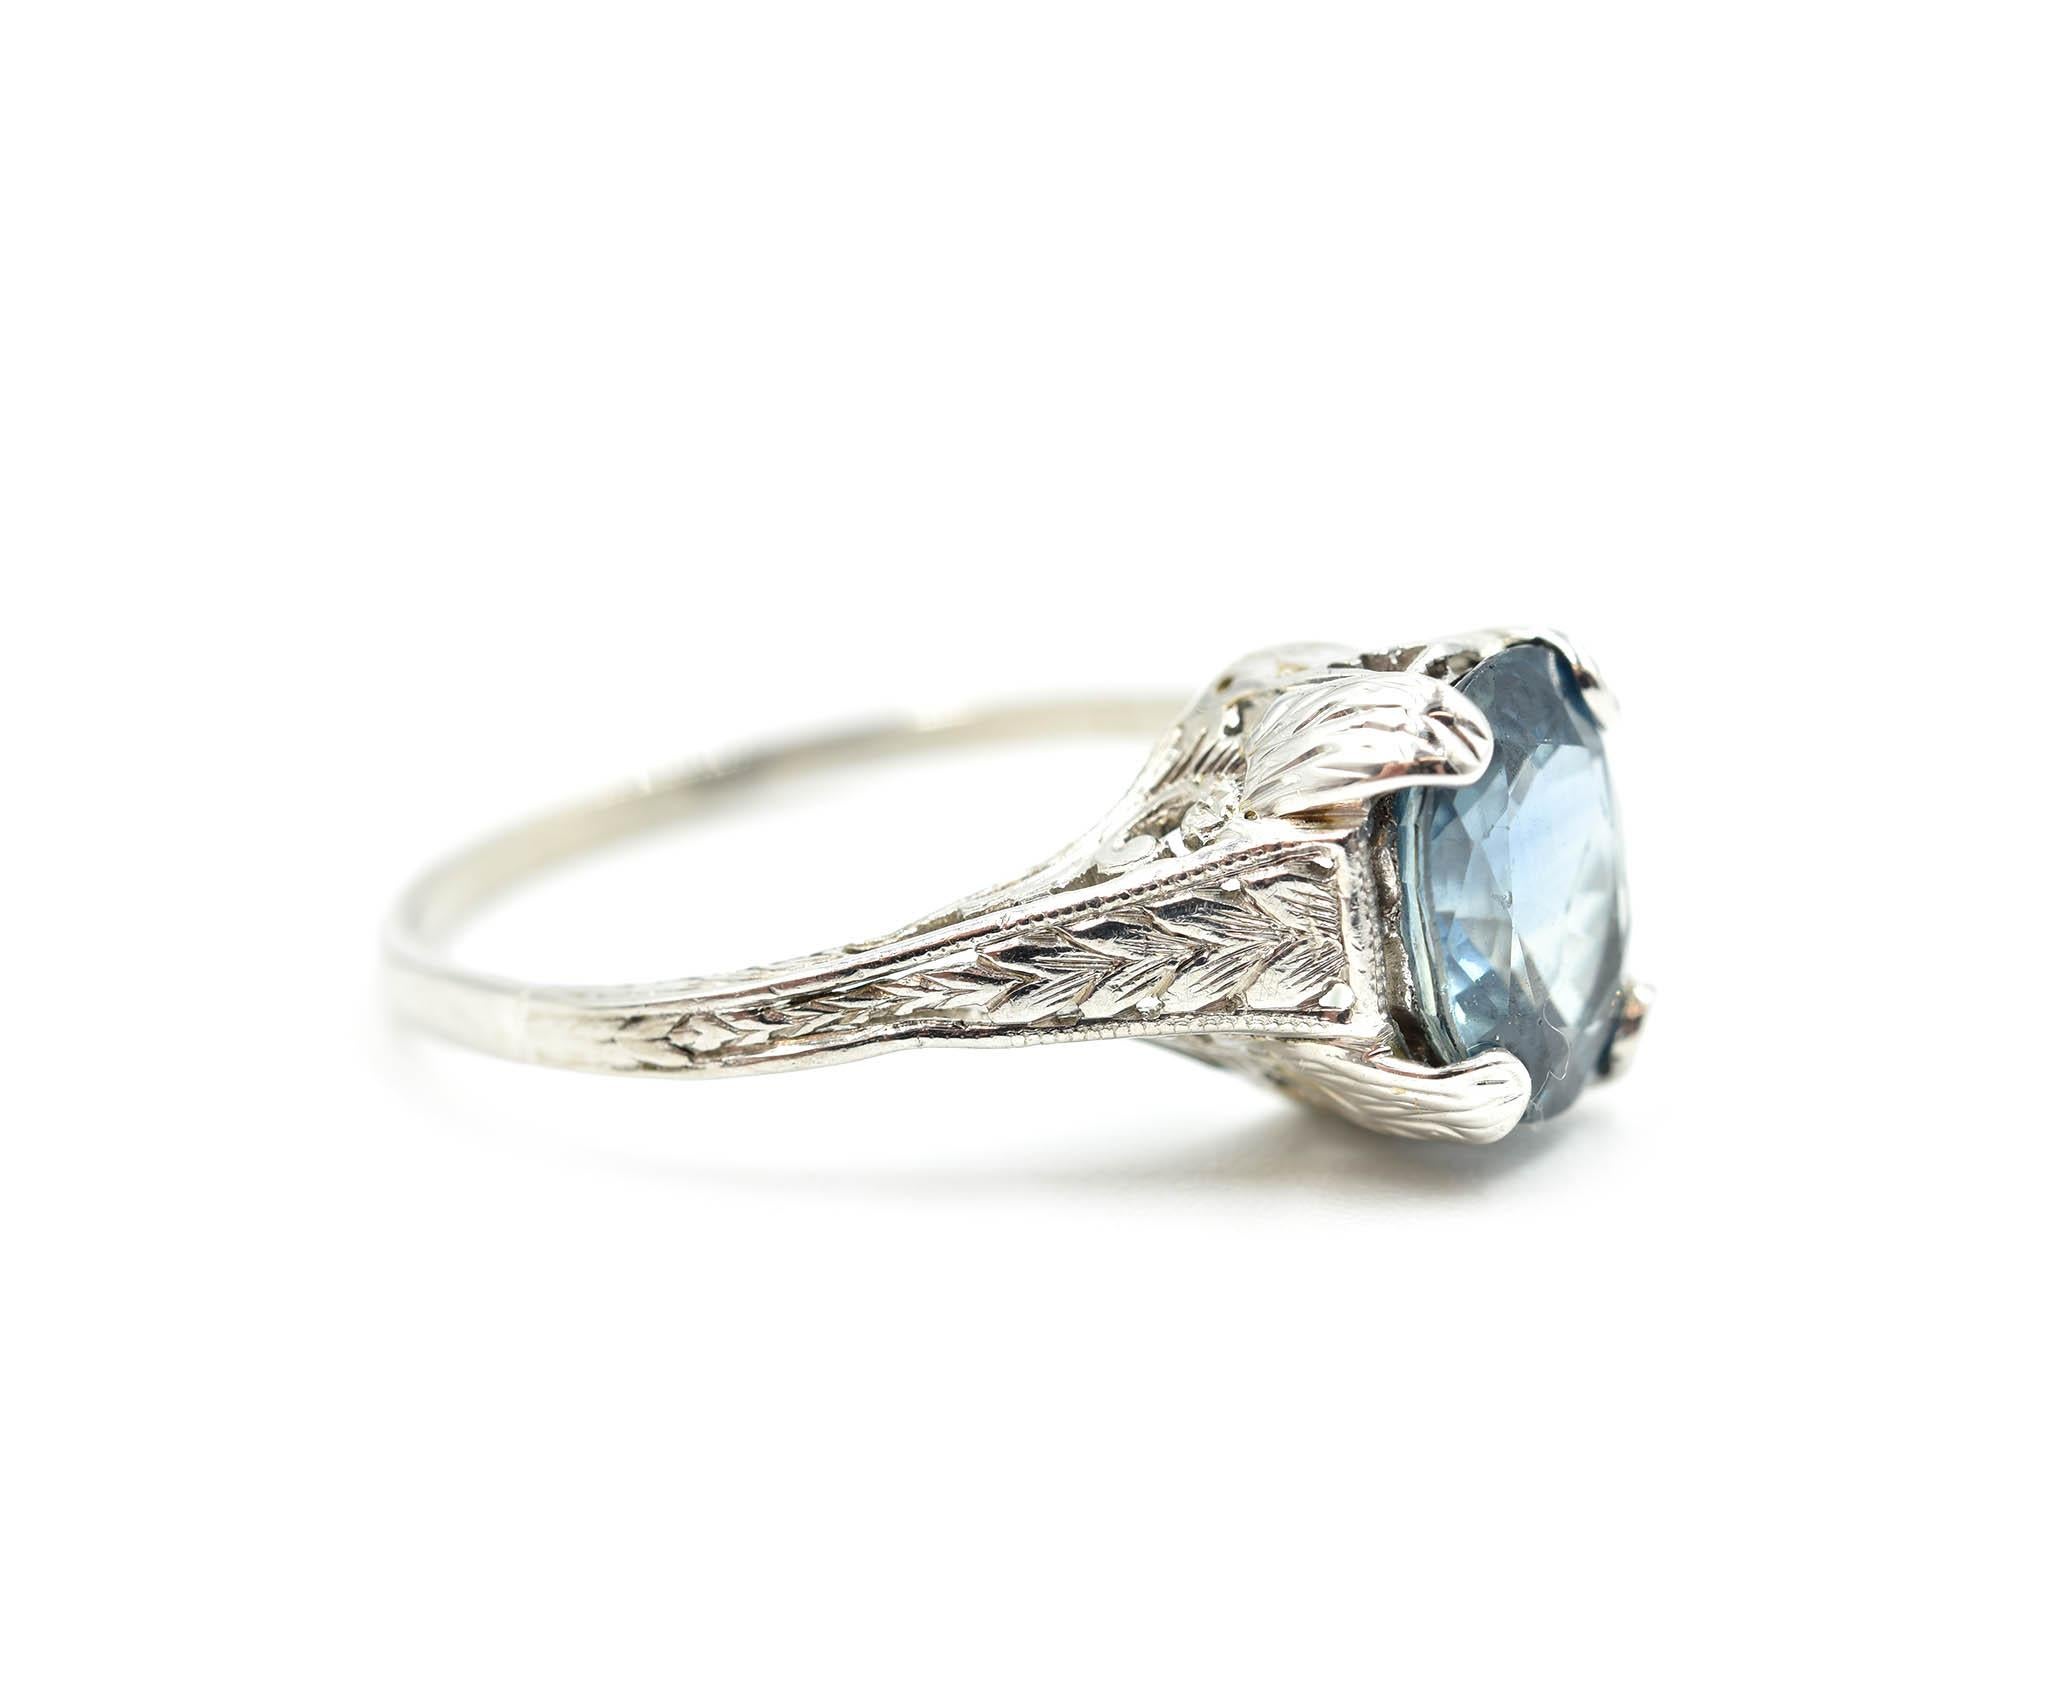 Designer: custom design
Material: platinum
Blue Sapphire: one oval cut 1.70 carat 
Dimensions: ring top is 3/8-inch long and 1/4-inch wide
Ring Size: 7 3/4 (please allow two additional shipping days for sizing requests)
Weight: 3.55 grams
